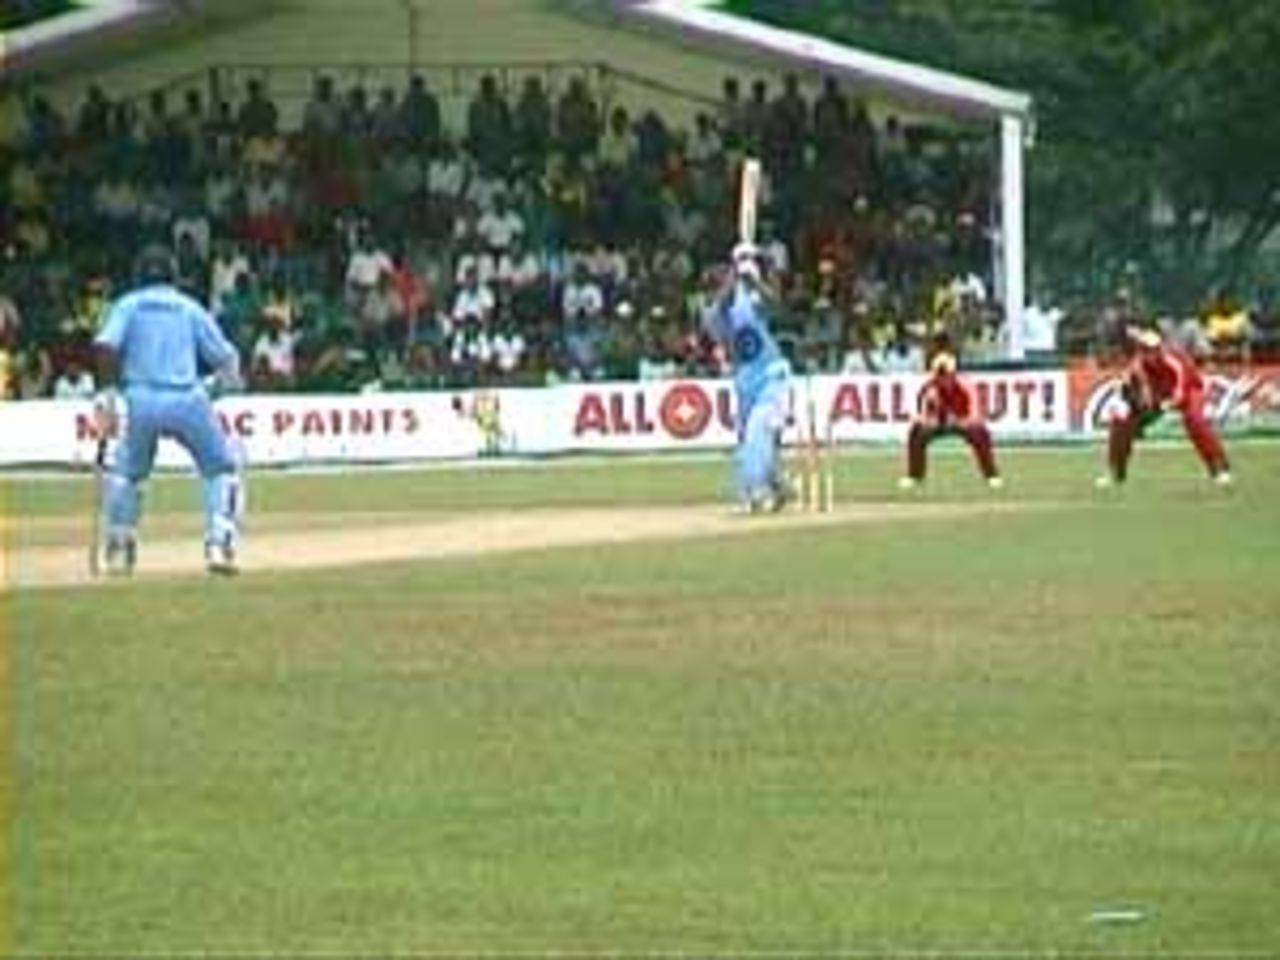 Jadeja flays through the covers as Tendulkar watches from the non-striker's end,India v Zimbabwe (2nd ODI), Coca-Cola Singapore Challenge, 1999-2000, Kallang Ground, Singapore, 4 Sep 1999